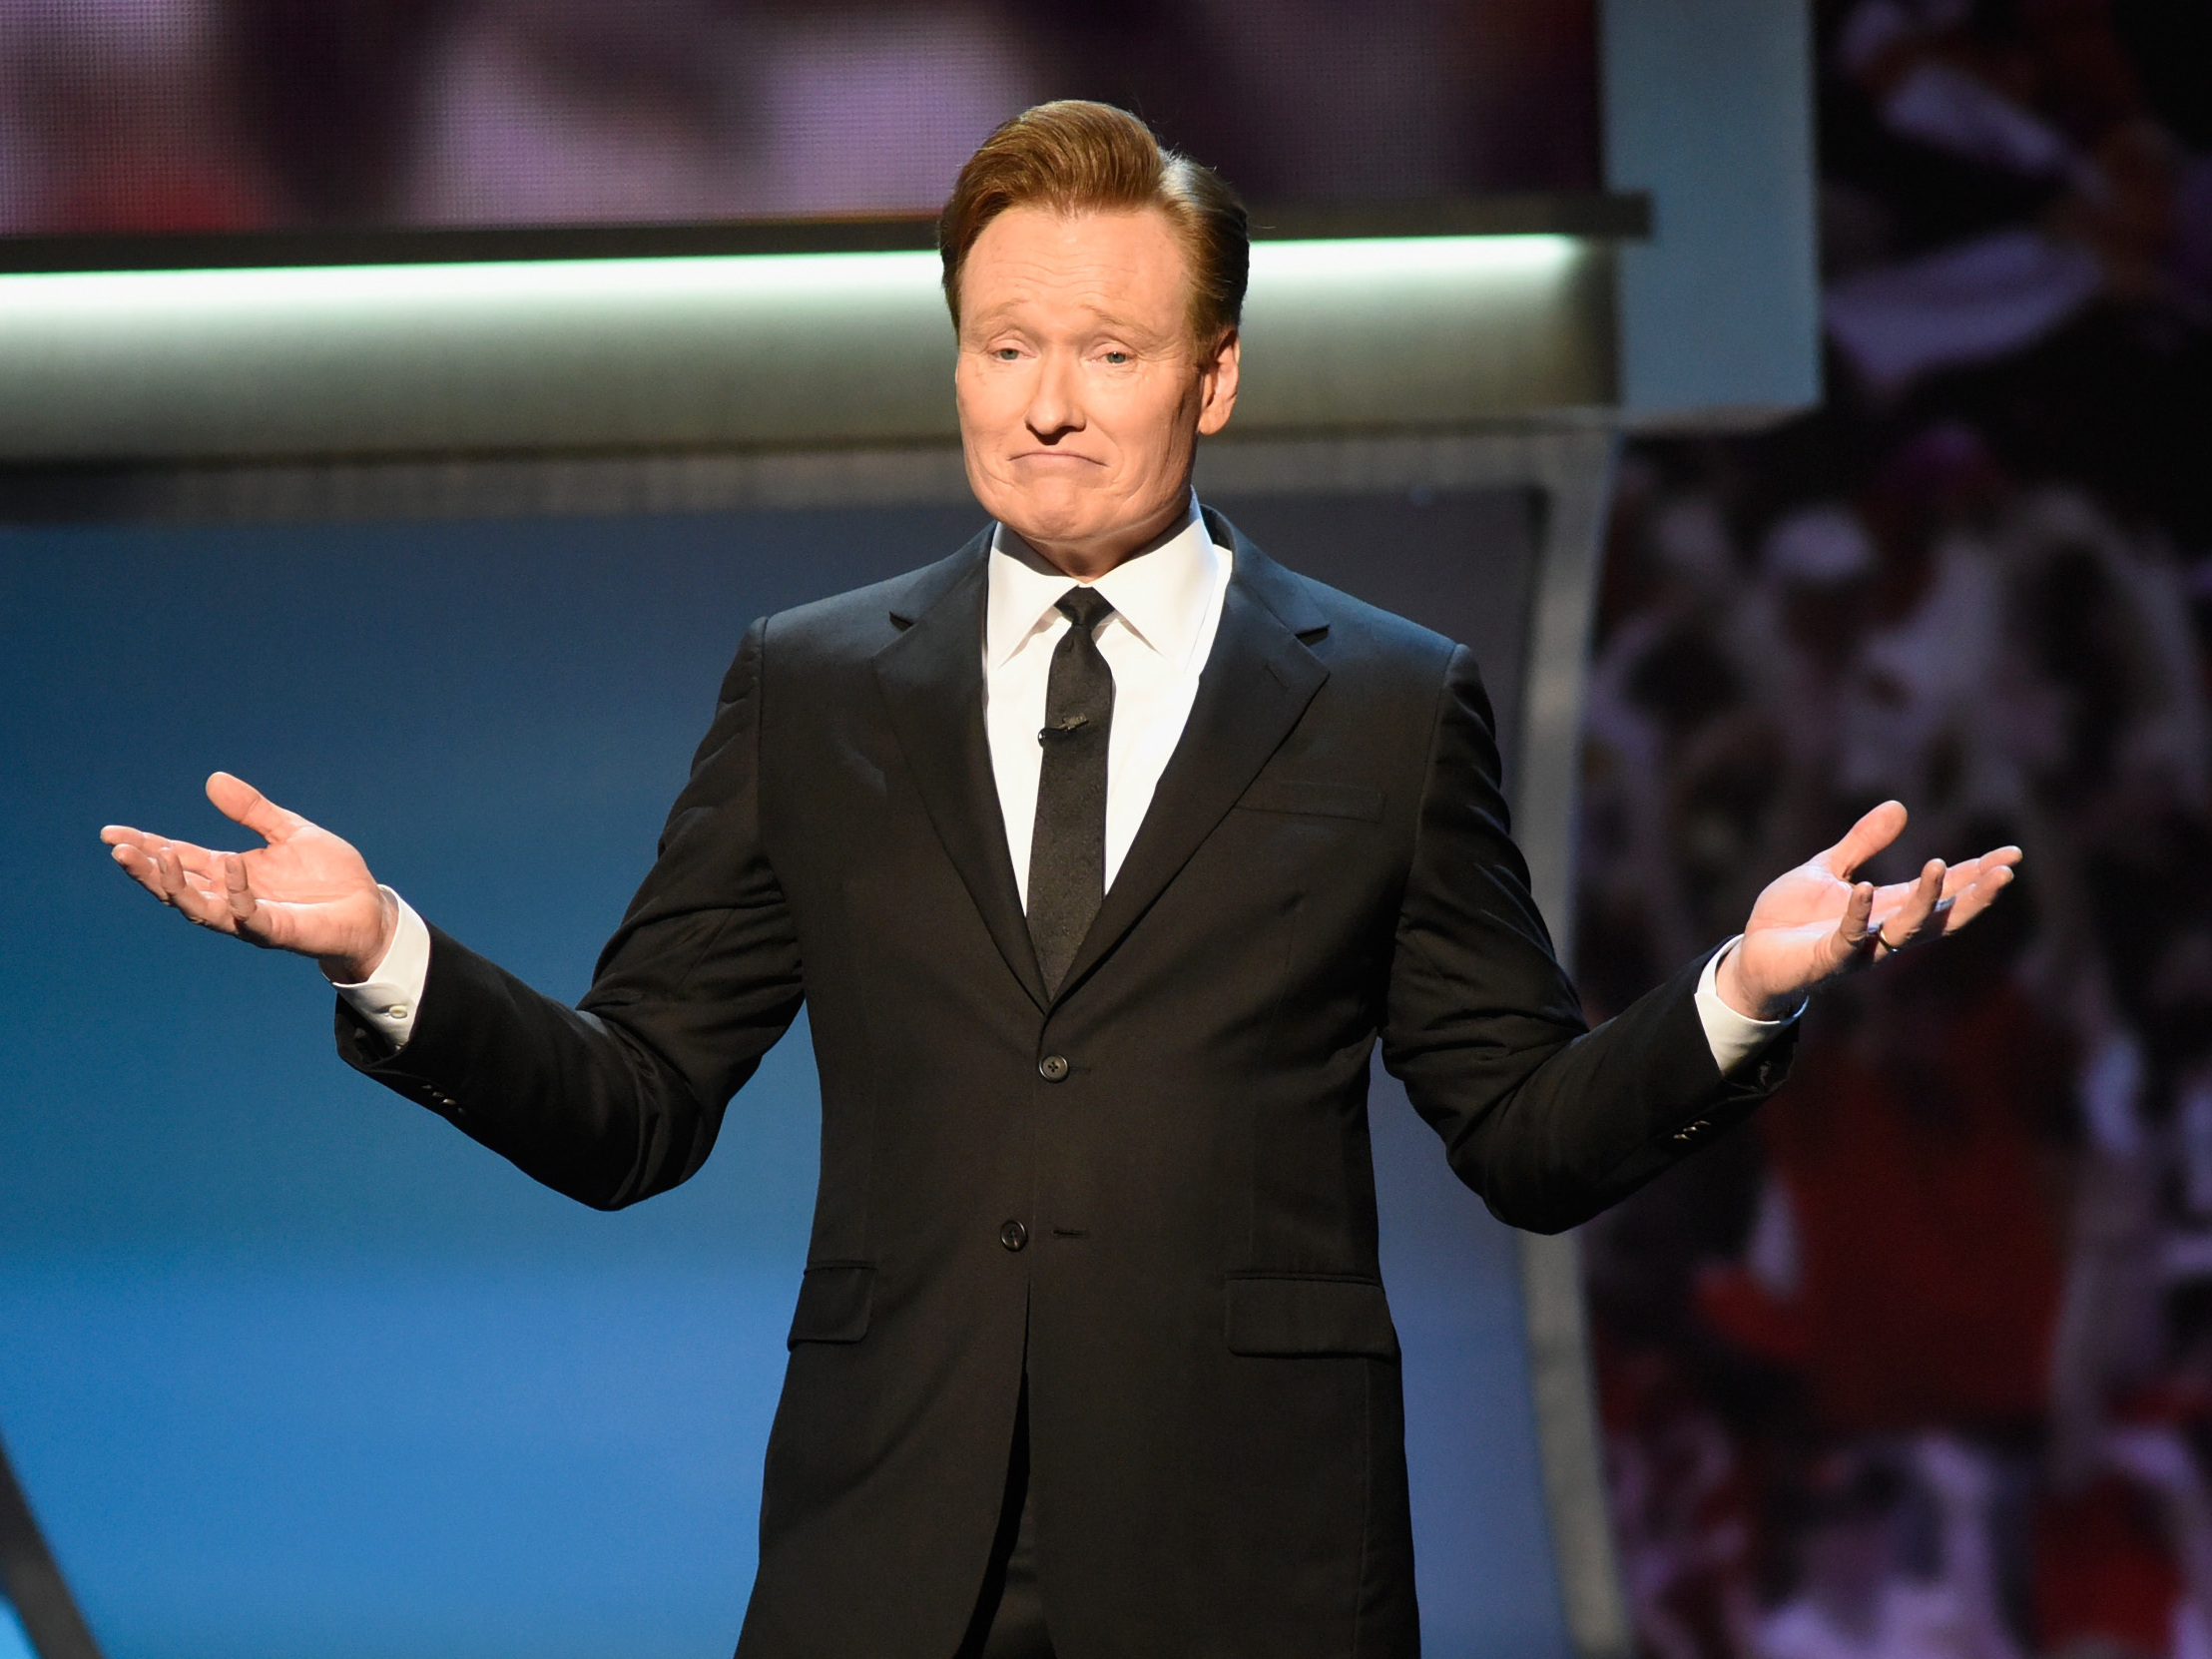 Is Conan O’Brien the best ‘Hot Ones’ guest ever? Discuss.